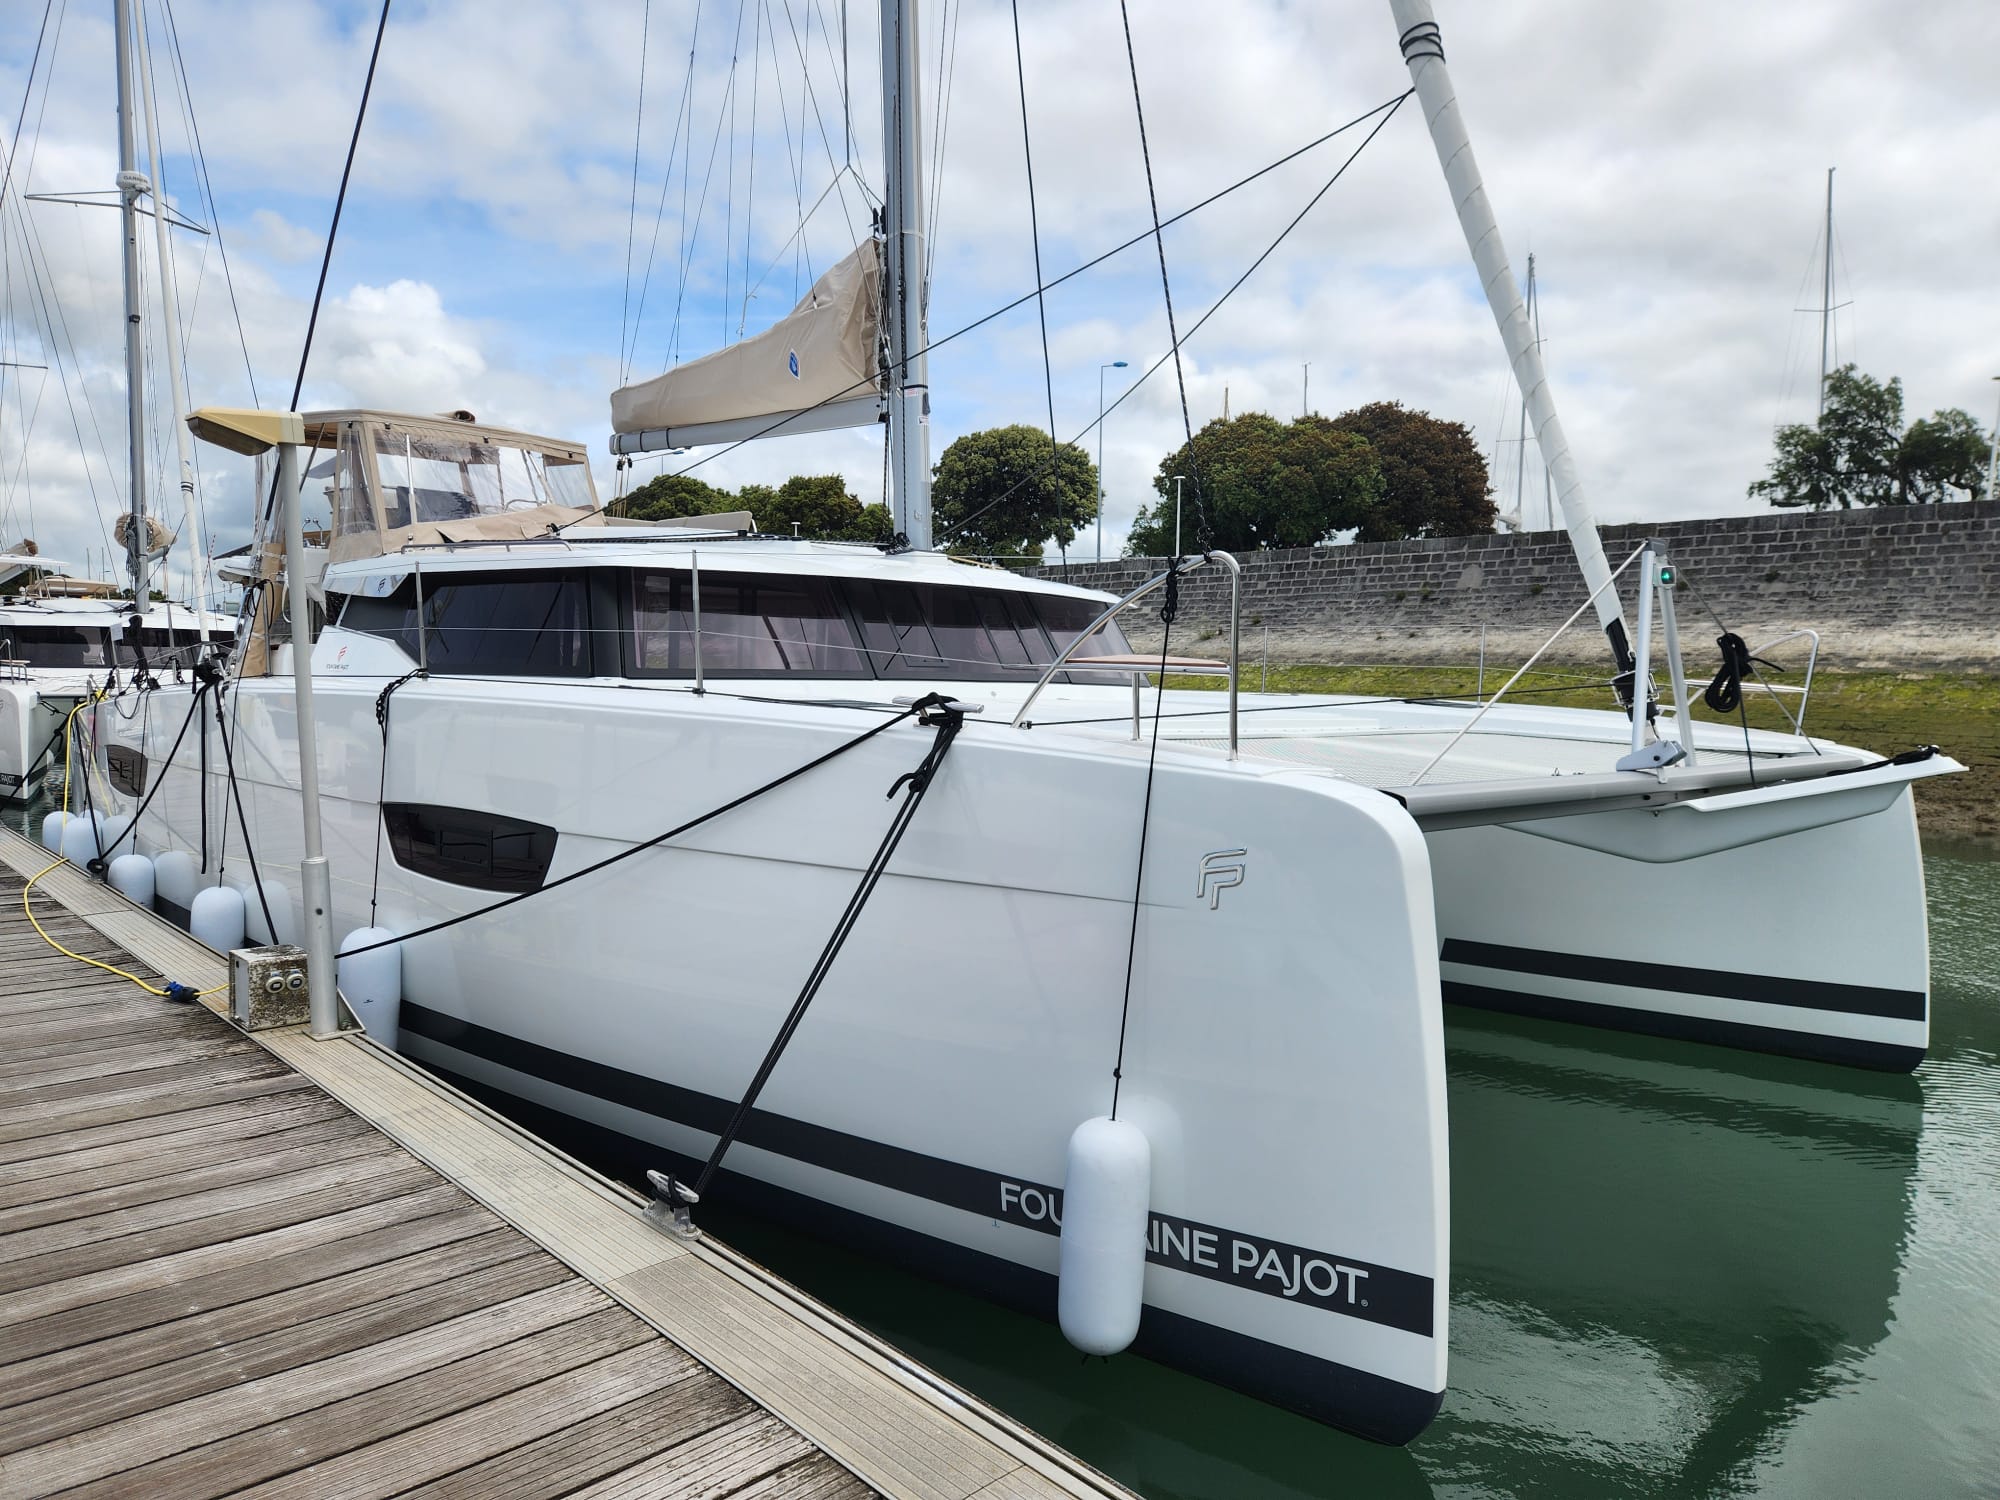 Fontaine Pajot Tanna 47 on the dock for a yacht delivery by yacht delivery solutions